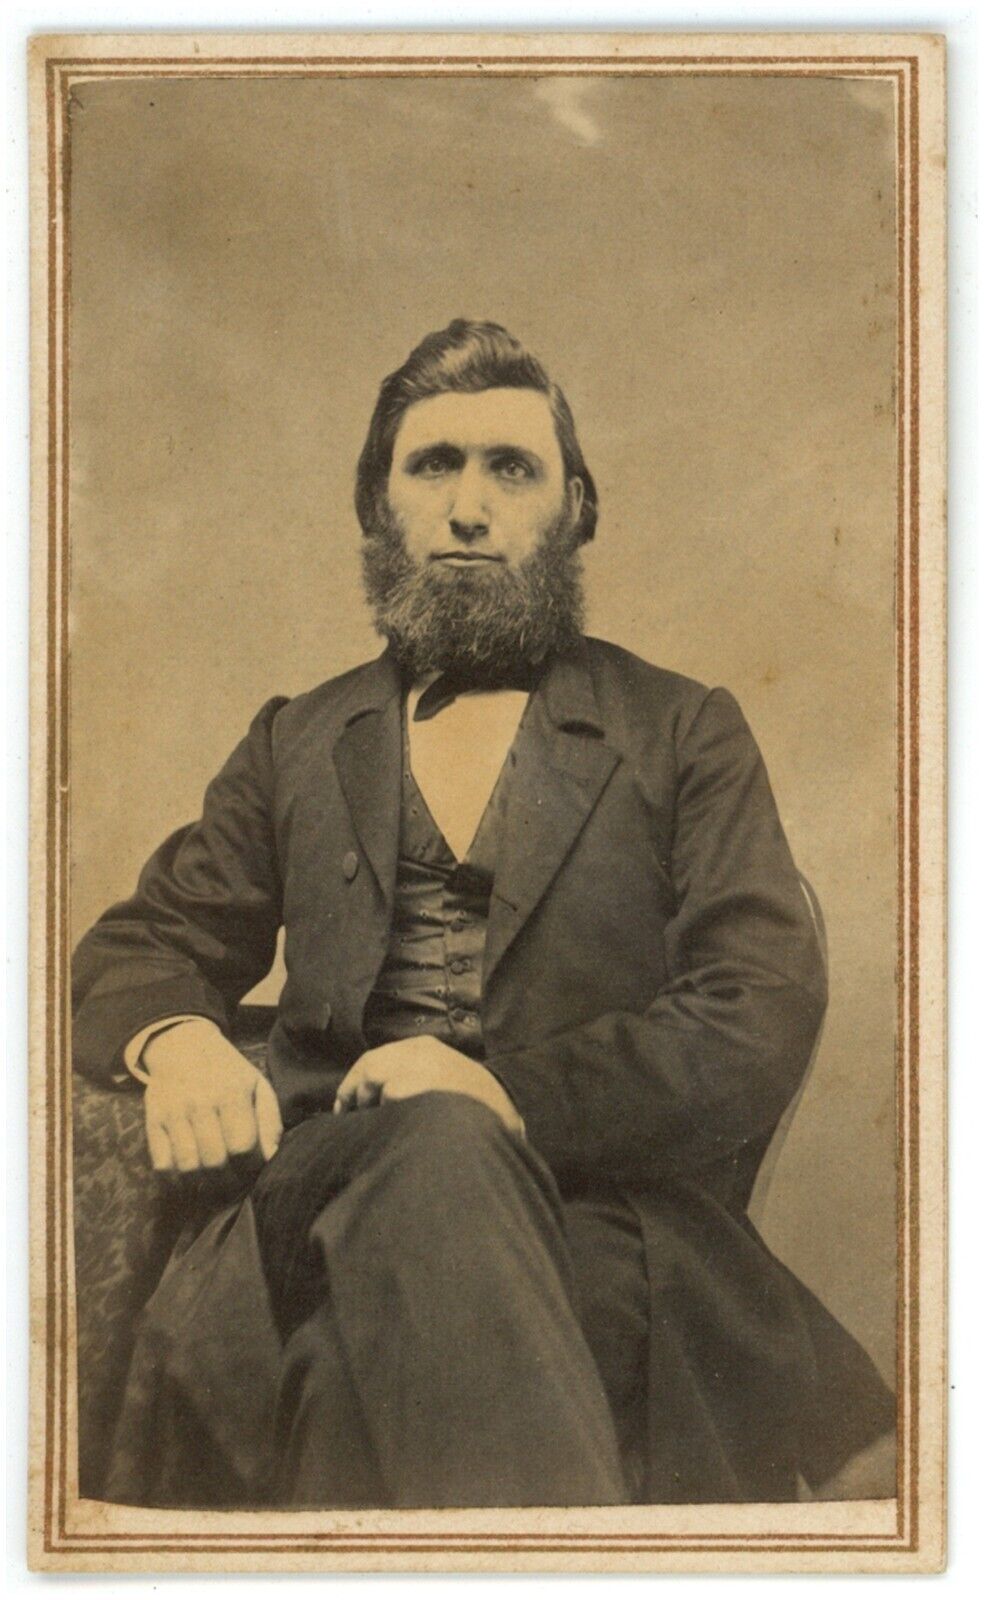 CIRCA 1860\'S CDV Featuring Interesting Looking man With Full Chin Beard in Suit